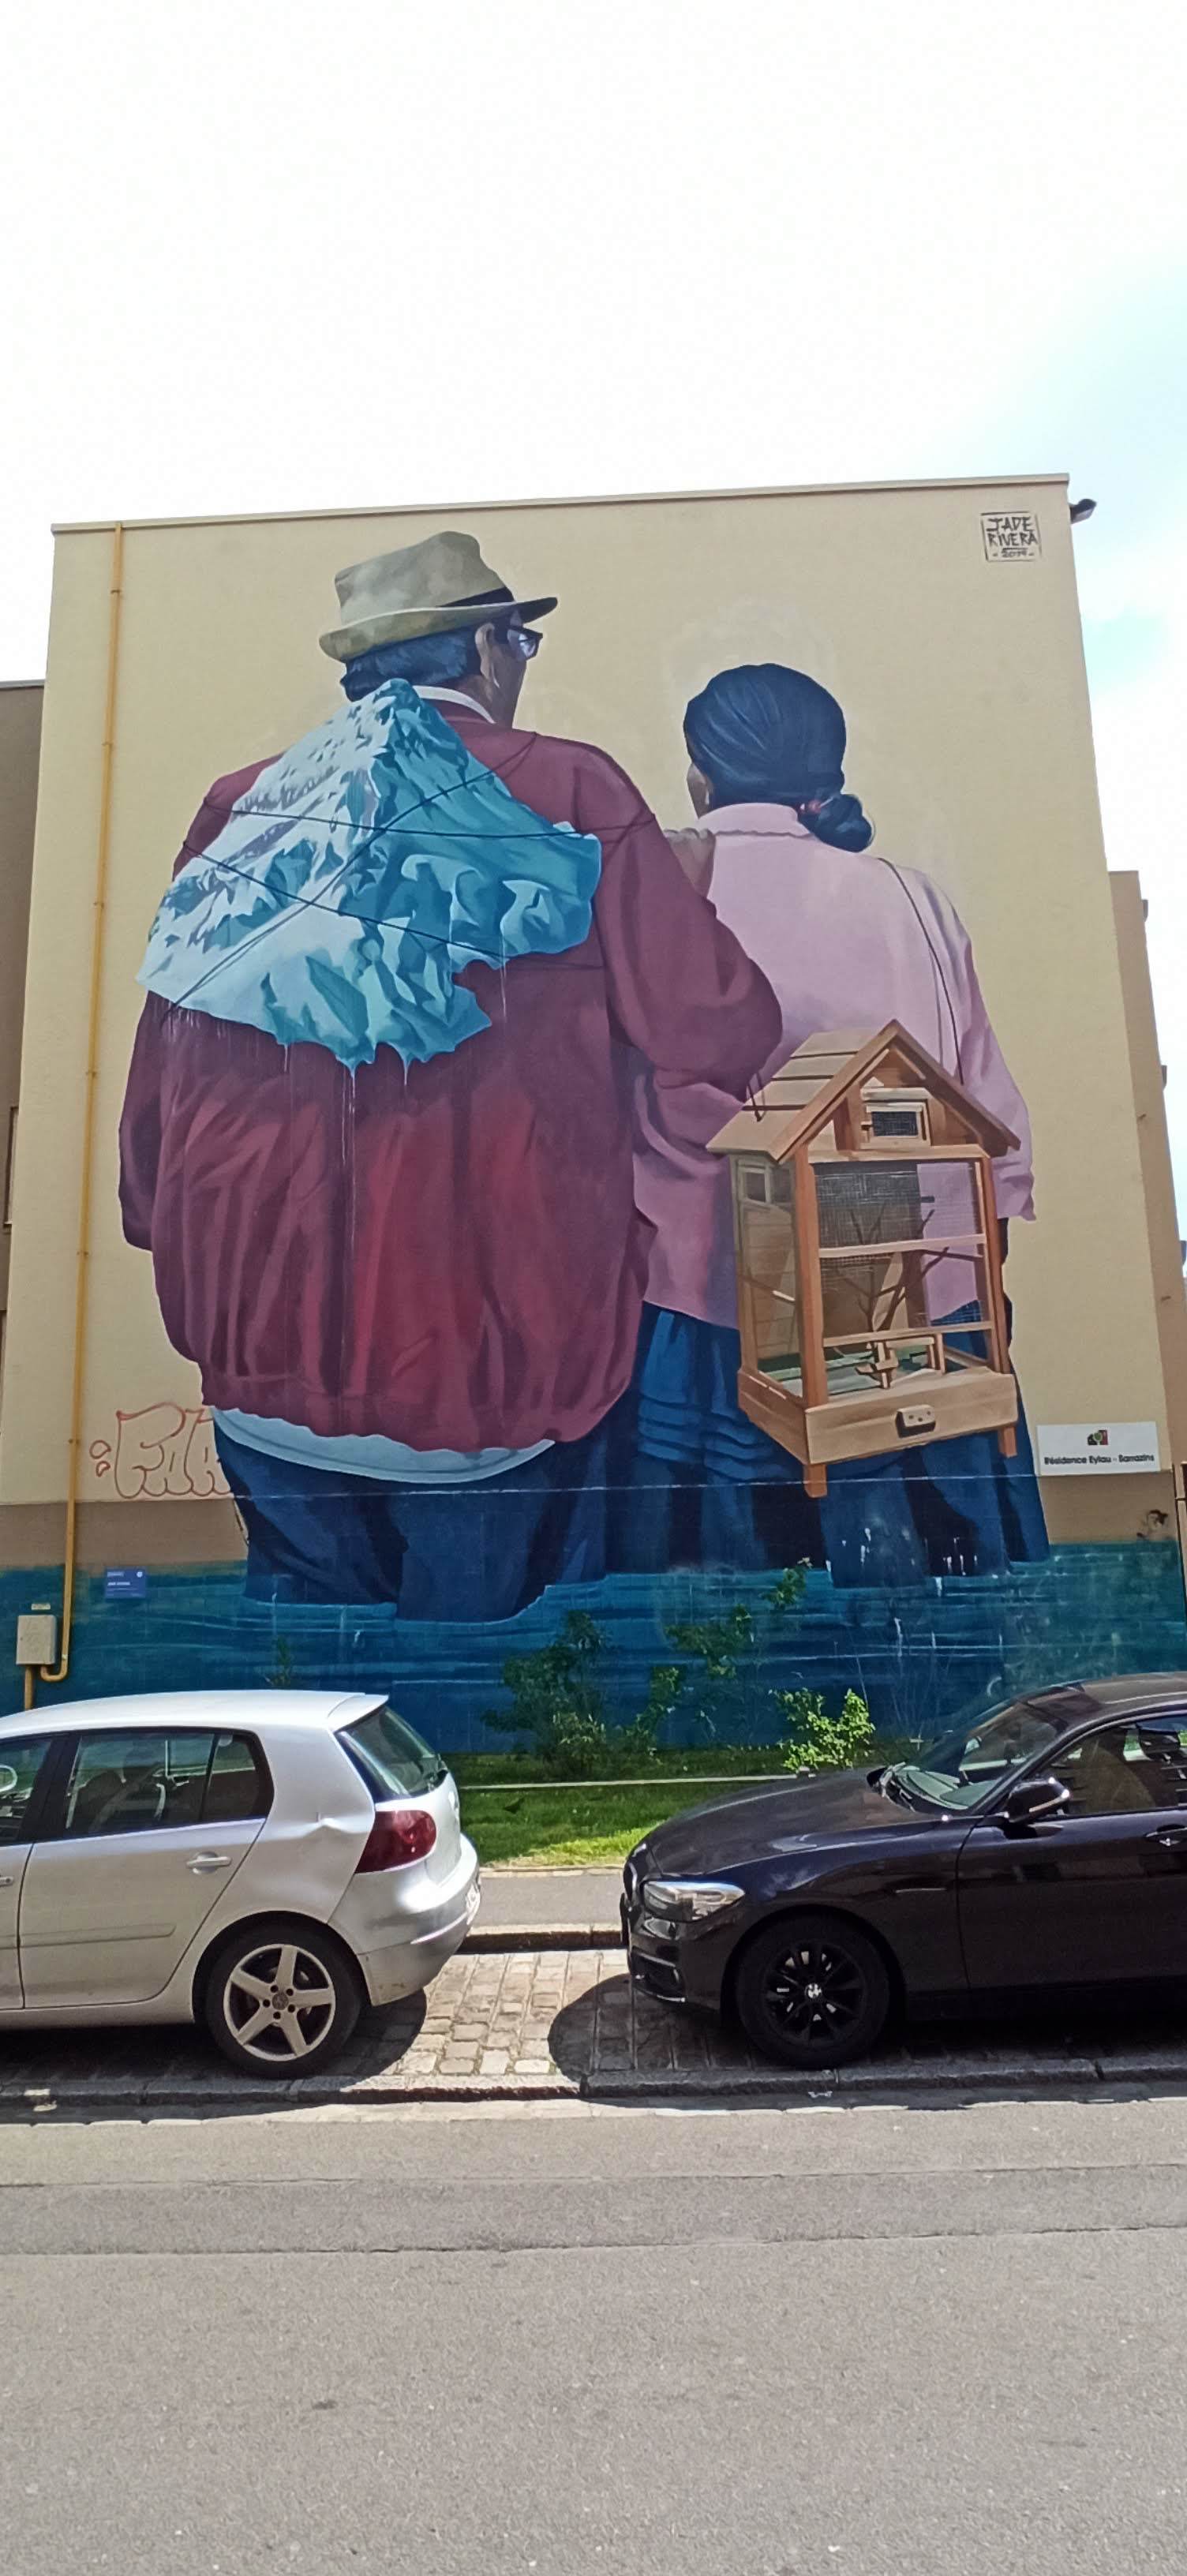 Graffiti 5279  by the artist Jade Rivera captured by Rabot in Lille France